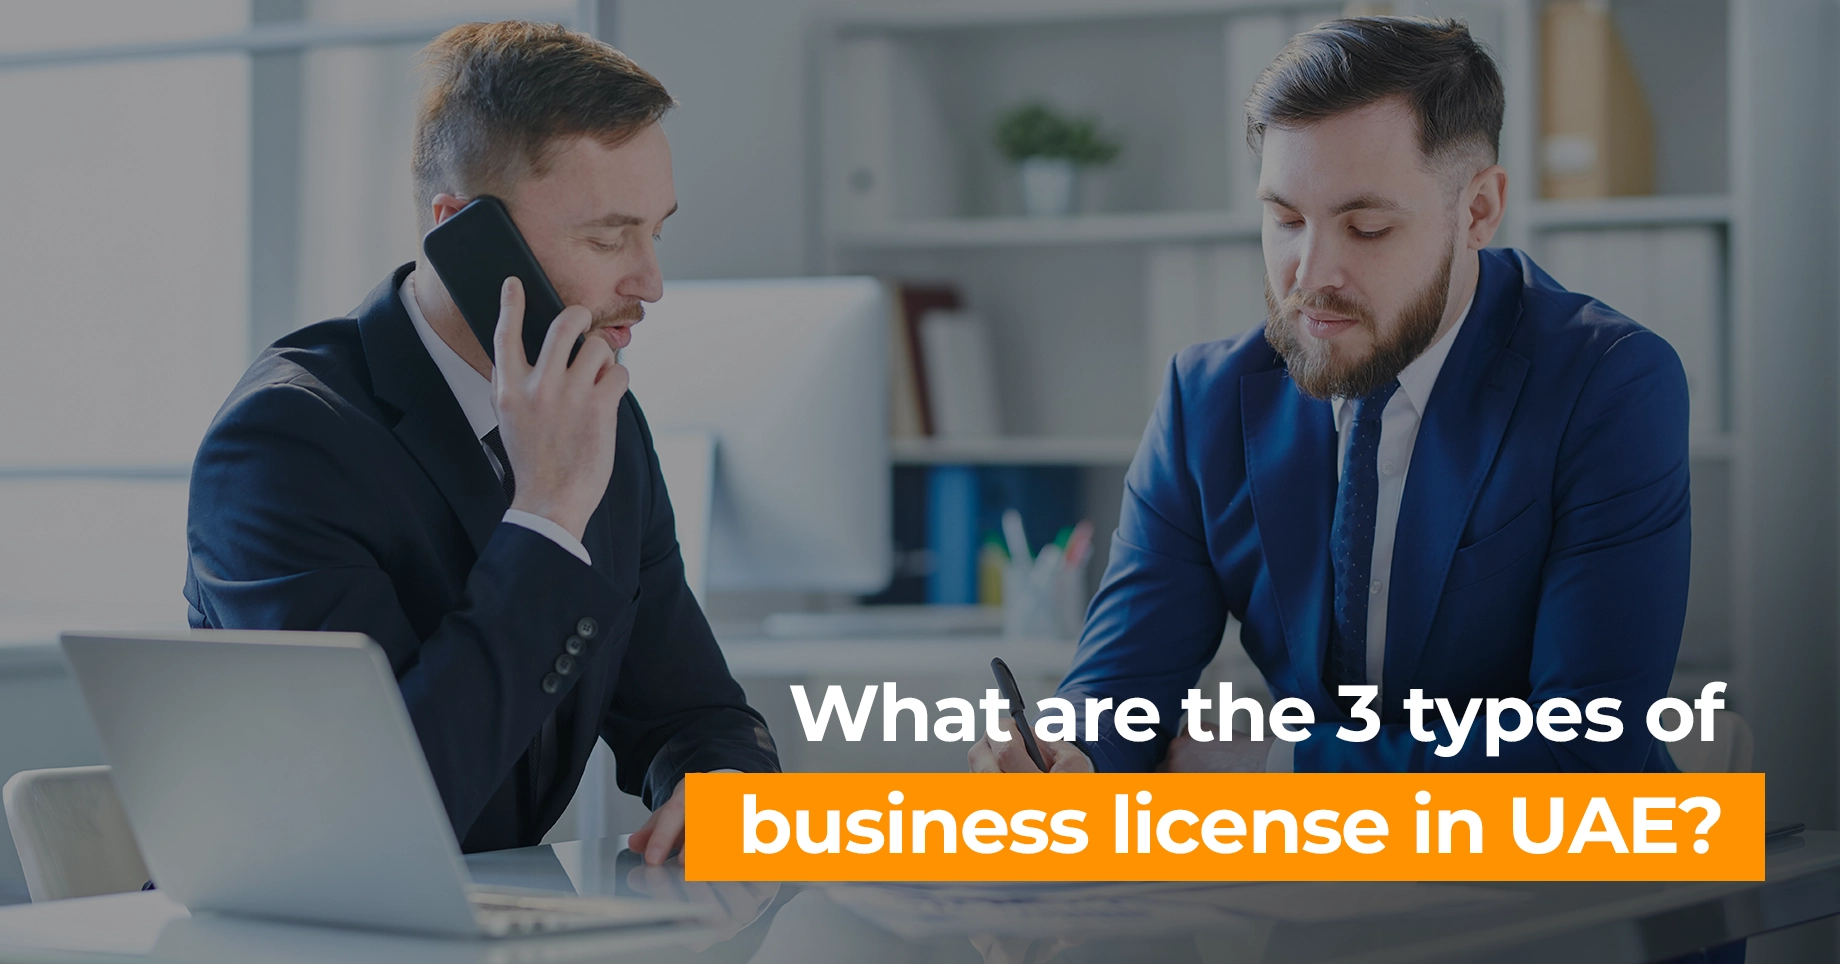 What are the types of business license in UAE?